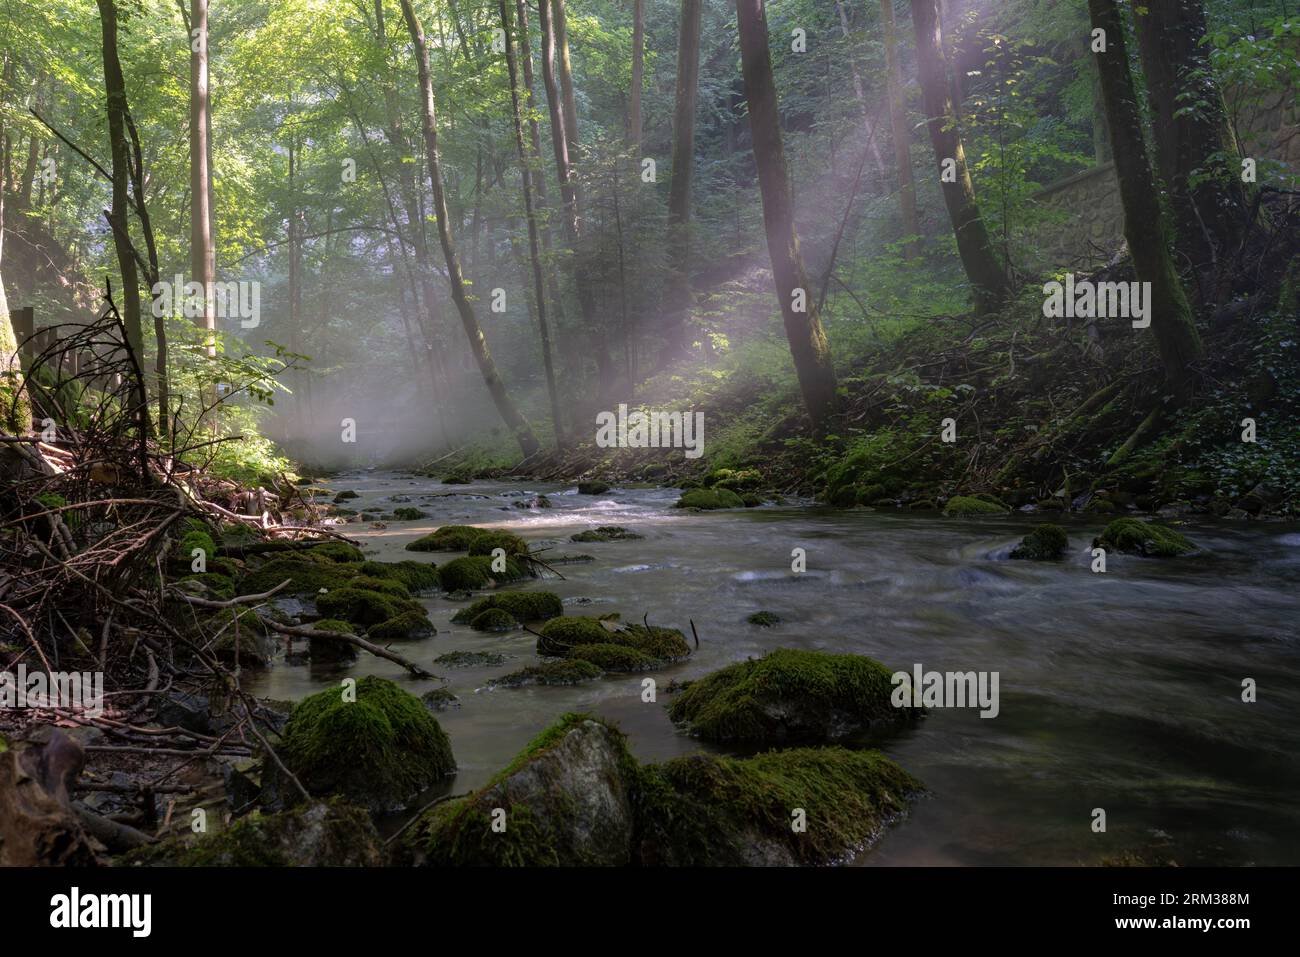 Wide angle shot of forested Punkva river valley in Moravian karst shortly after its karst spring. Mist condensates above cold water stream. Stock Photo